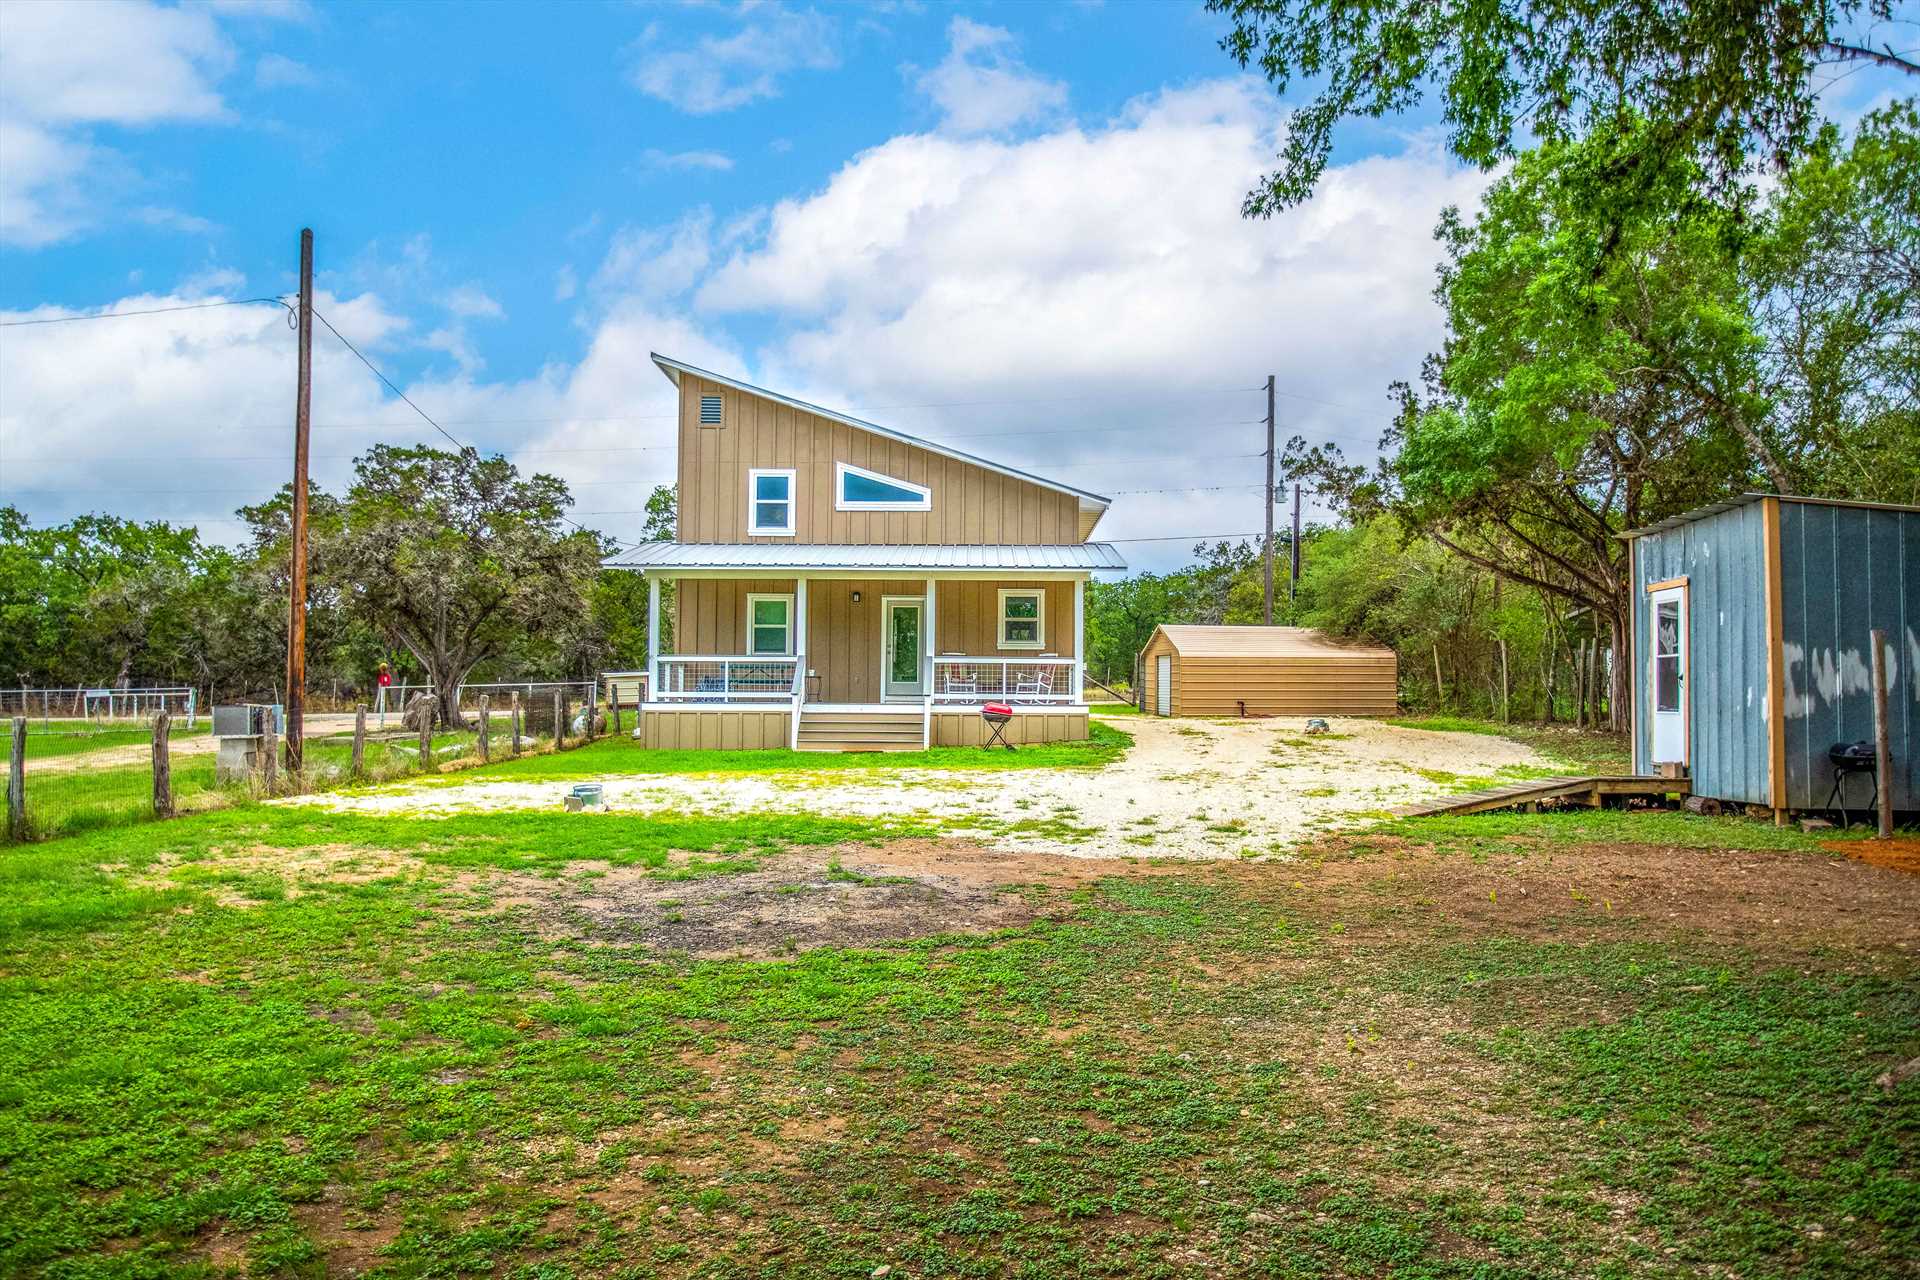                                                 The location of the River House makes it a great setting for nature lovers to admire wildlife, and for everyone to take in brilliant Hill Country sunsets and star-filled night skies!